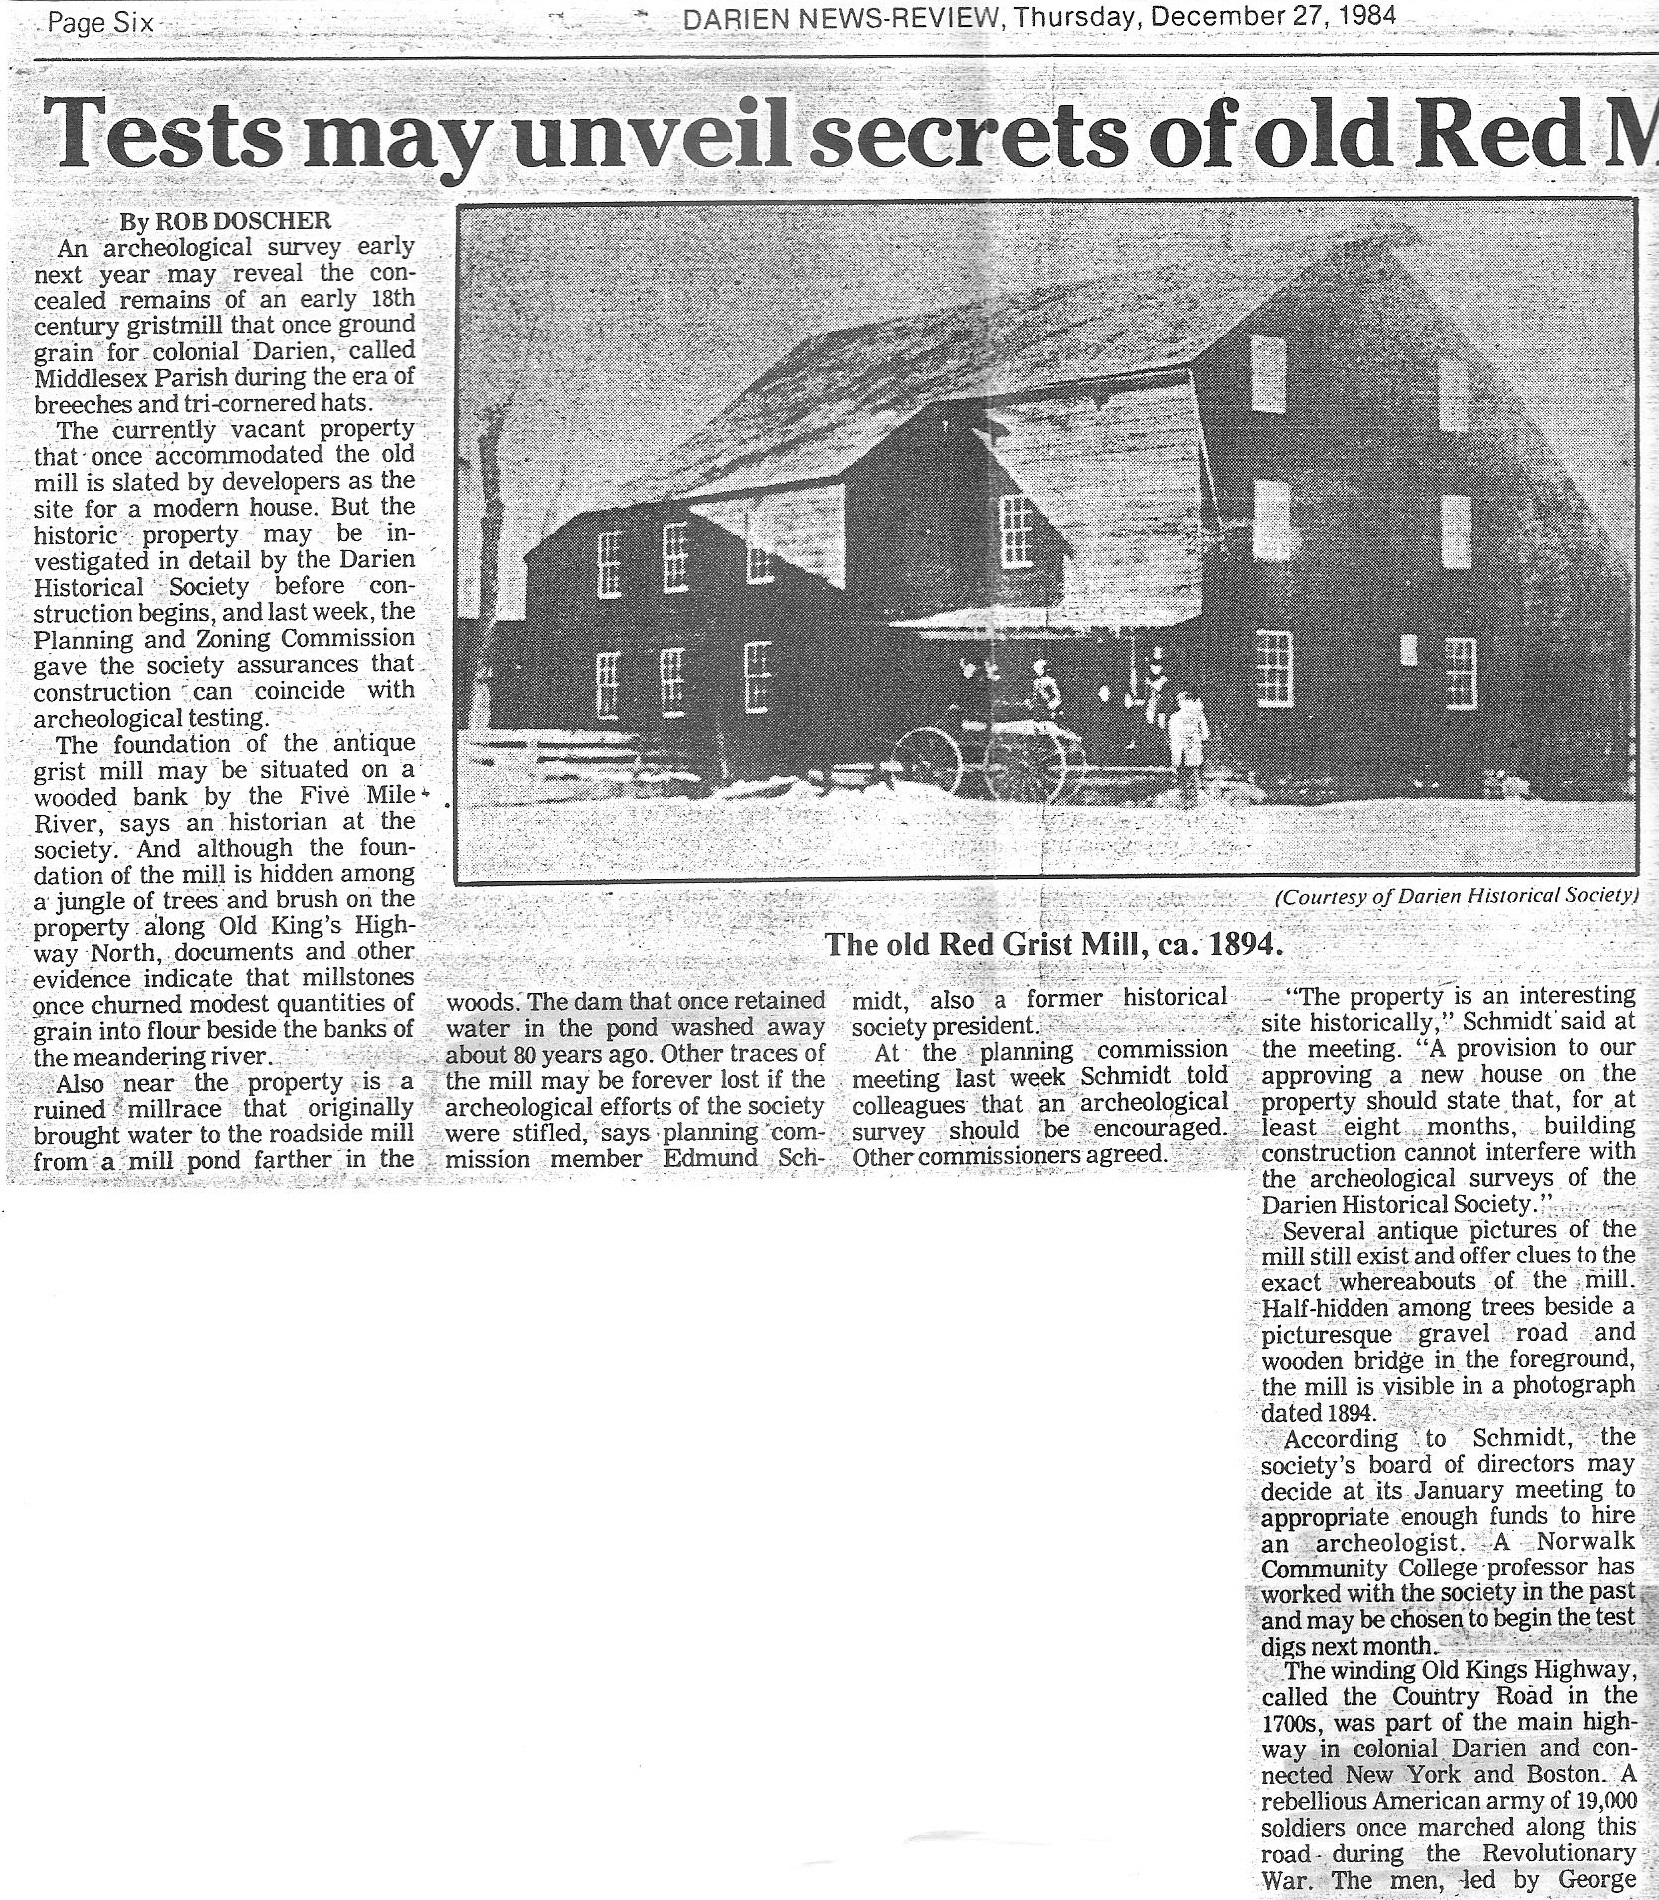 Old Red Mill Article